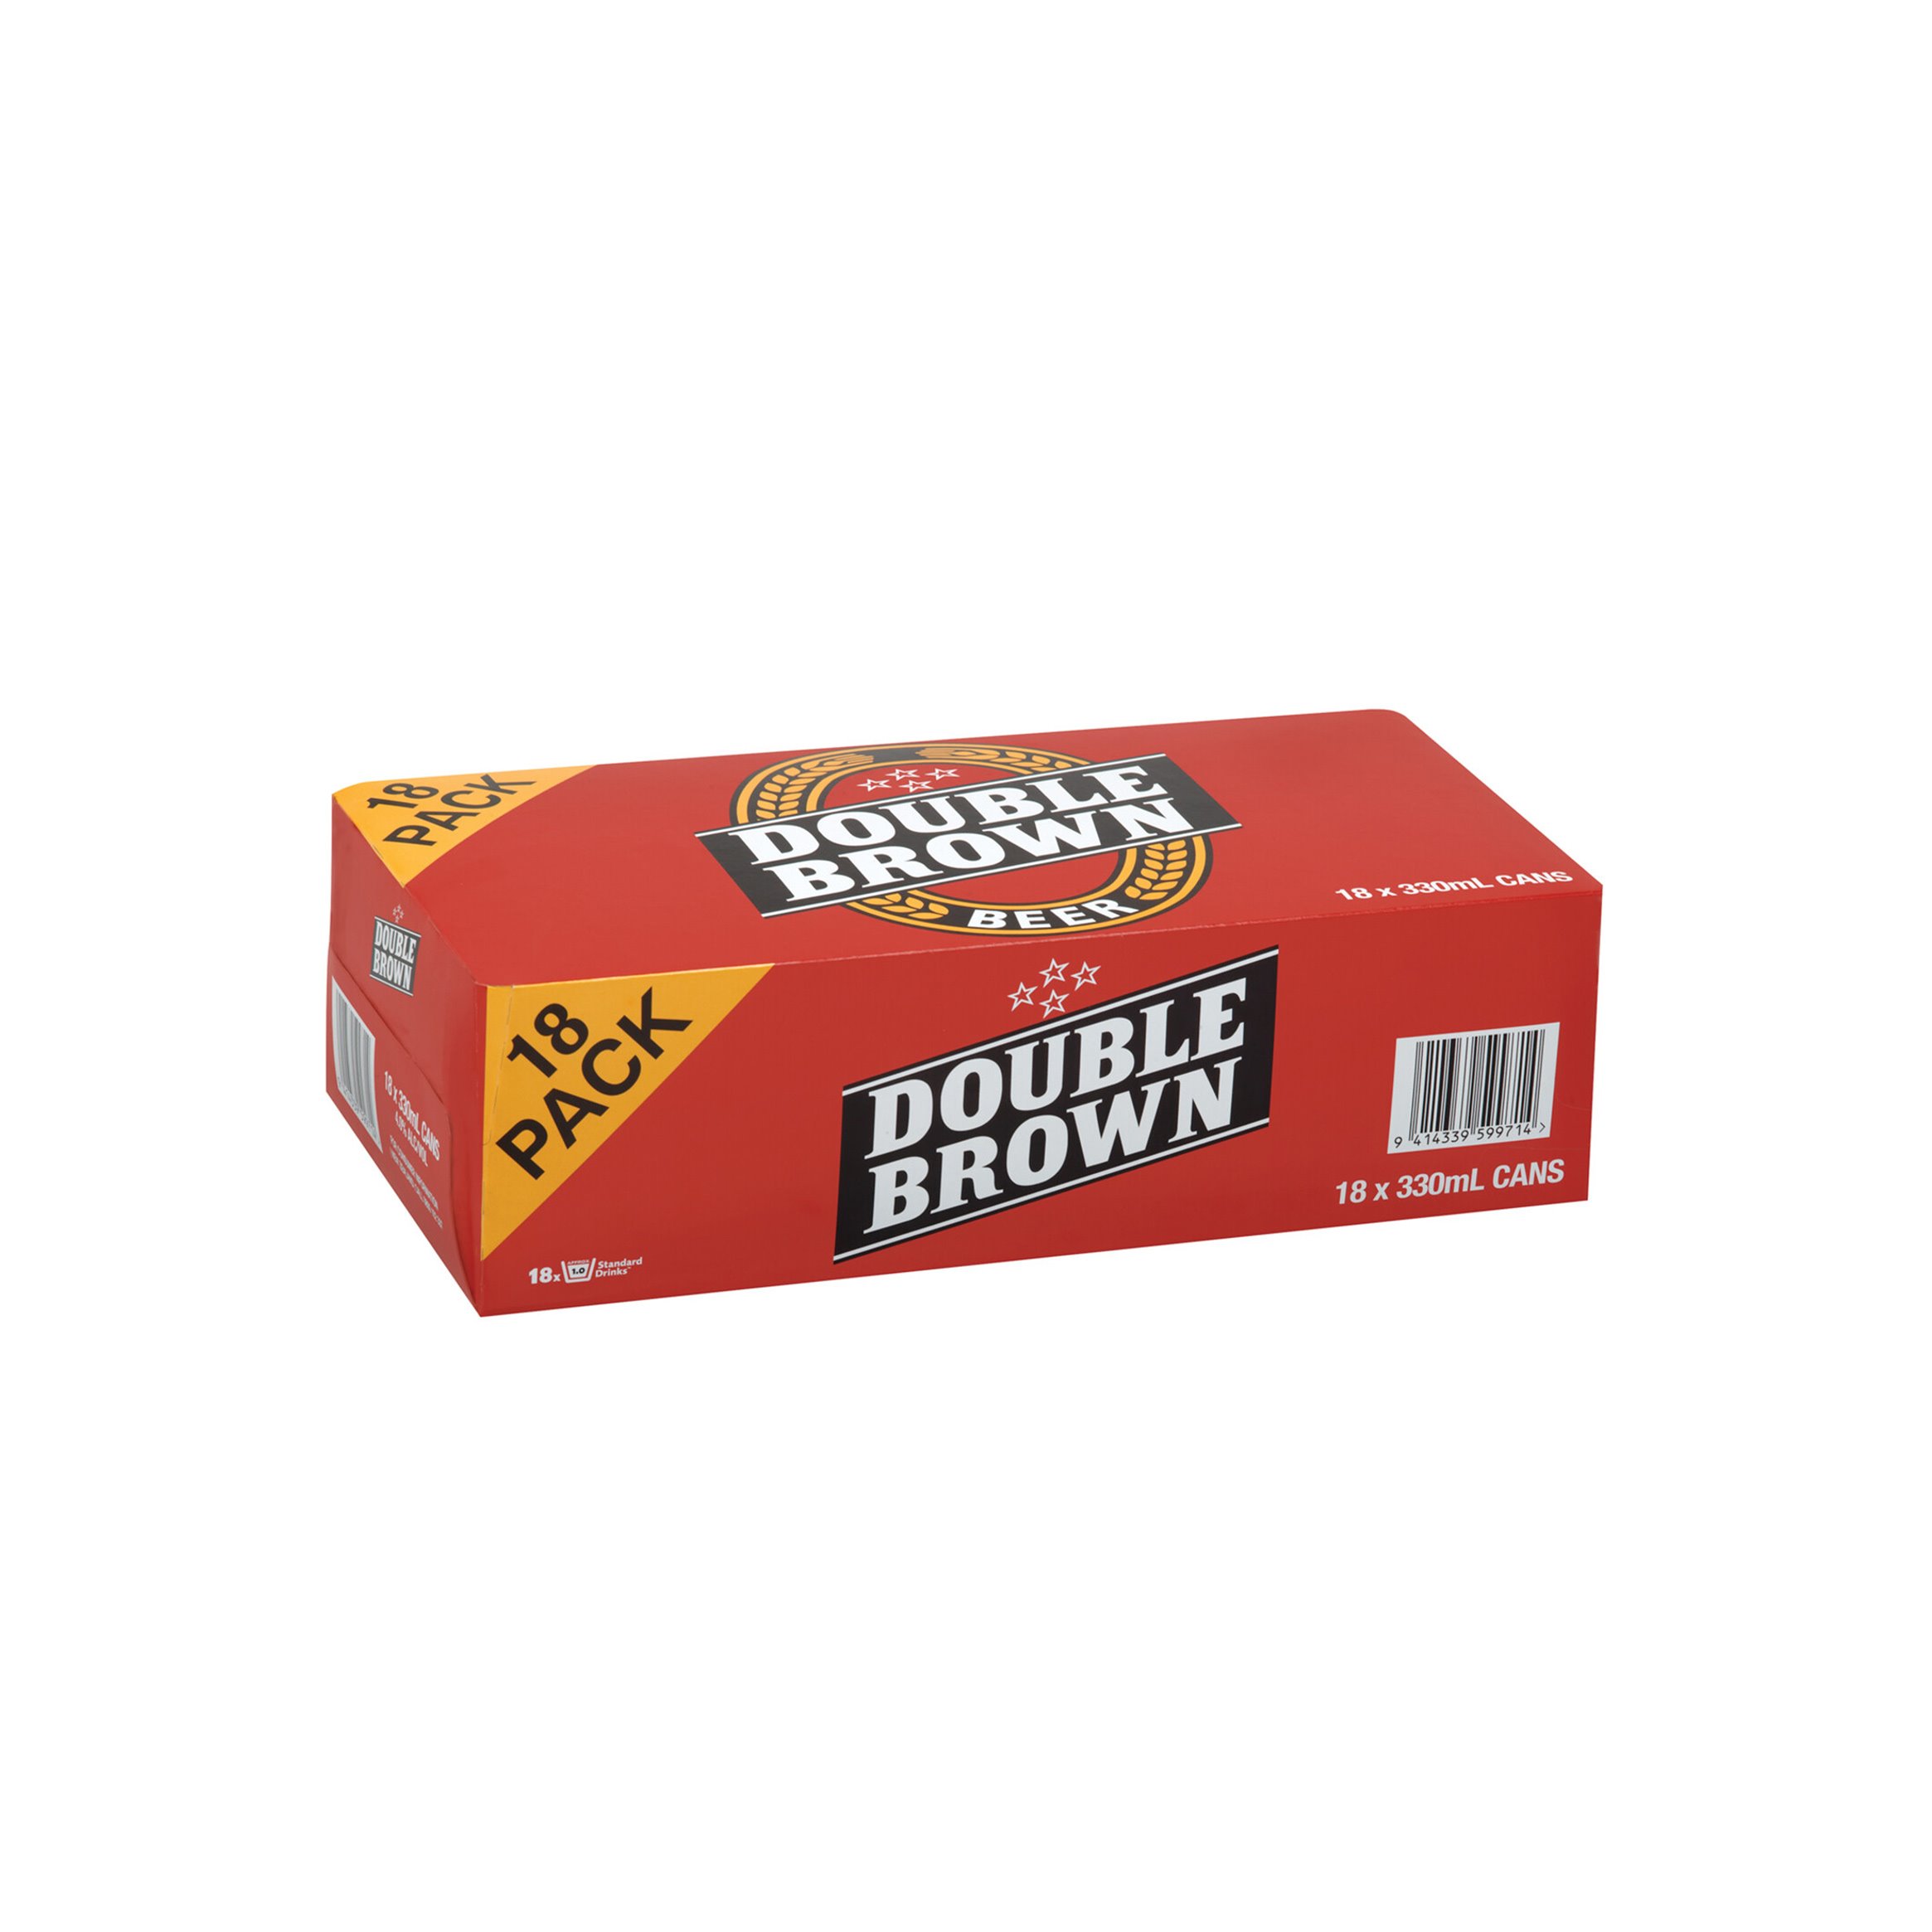 Double Brown